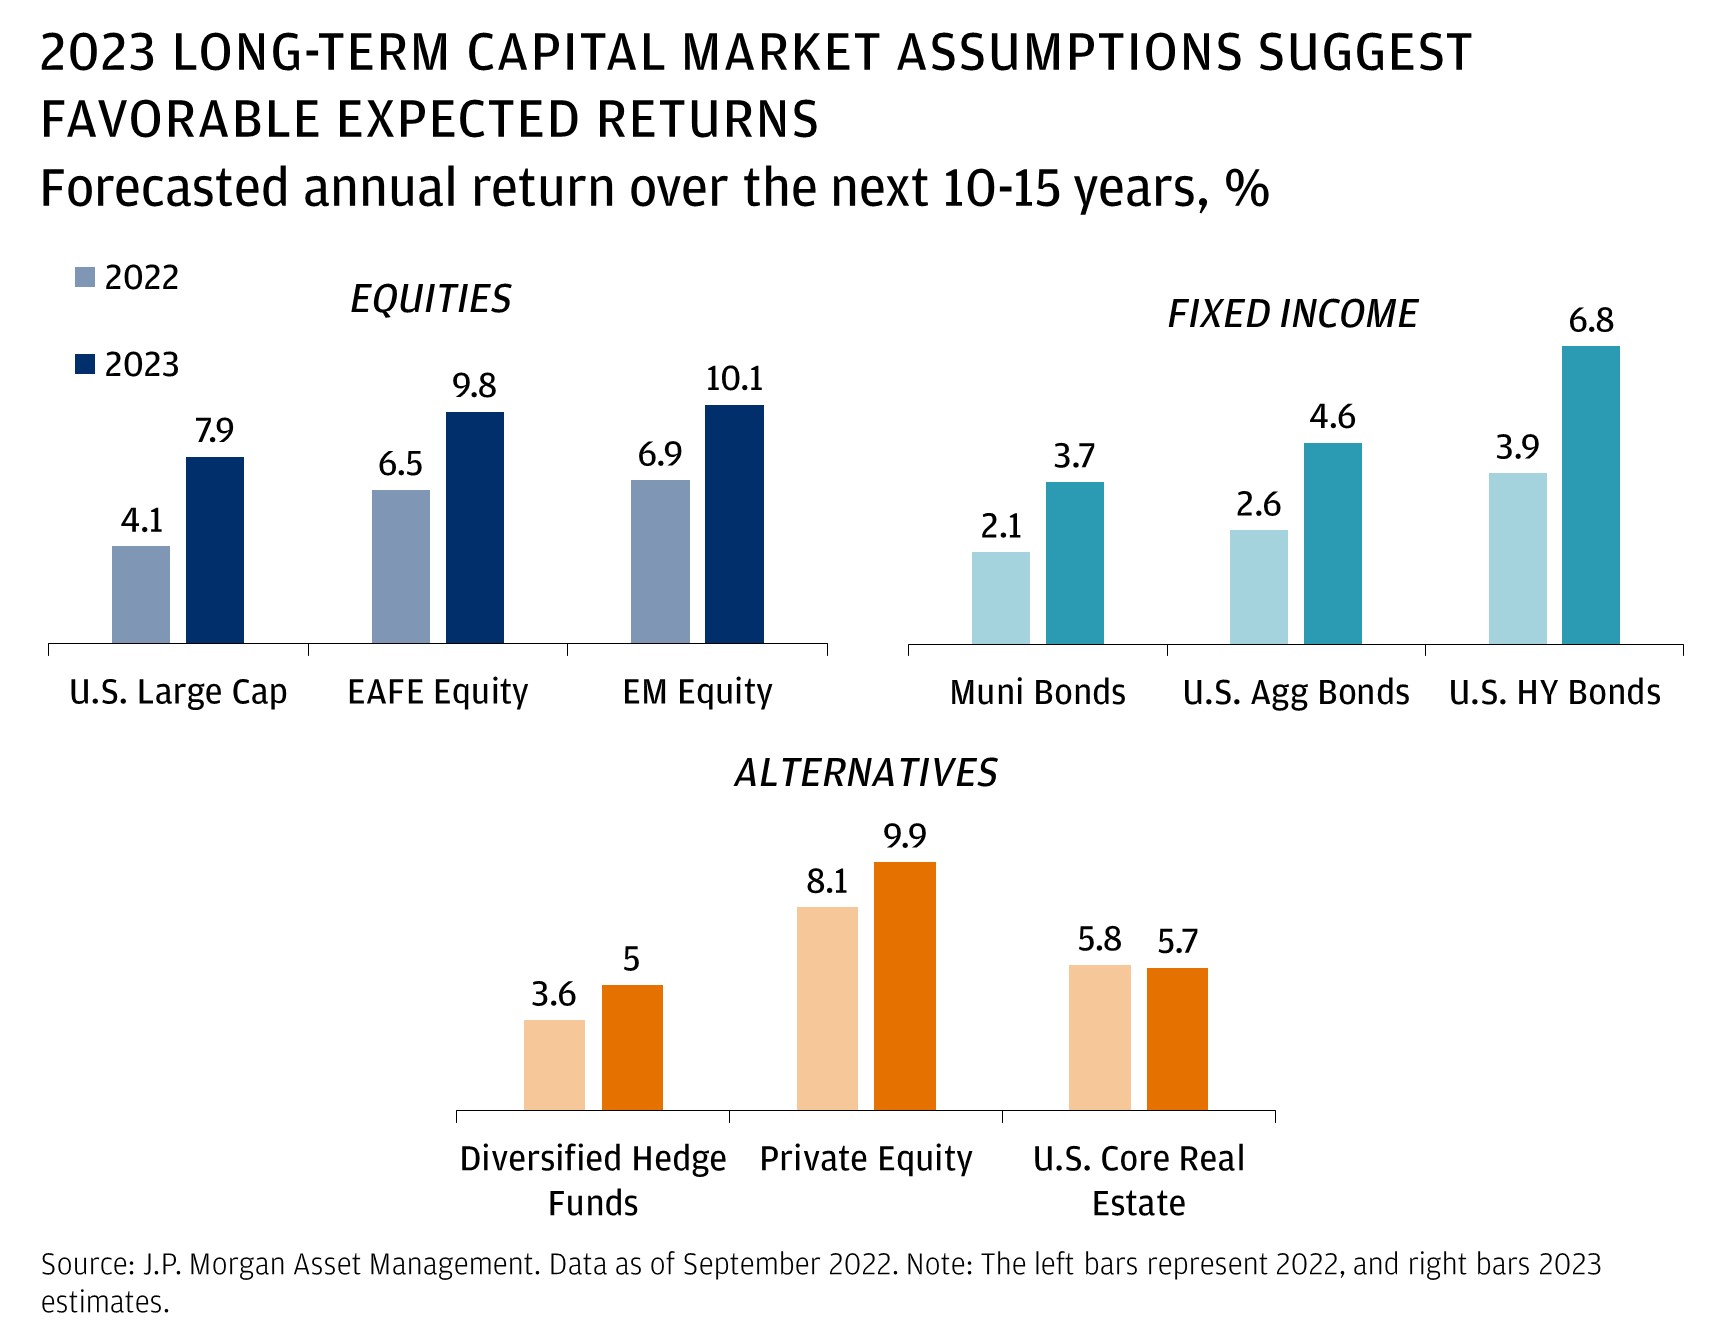 This graphic includes three charts (equities, fixed income and alternatives) and the 2022 and 2023 Long-Term Capital Market Assumptions annualized expected returns over the next 10–15 years.